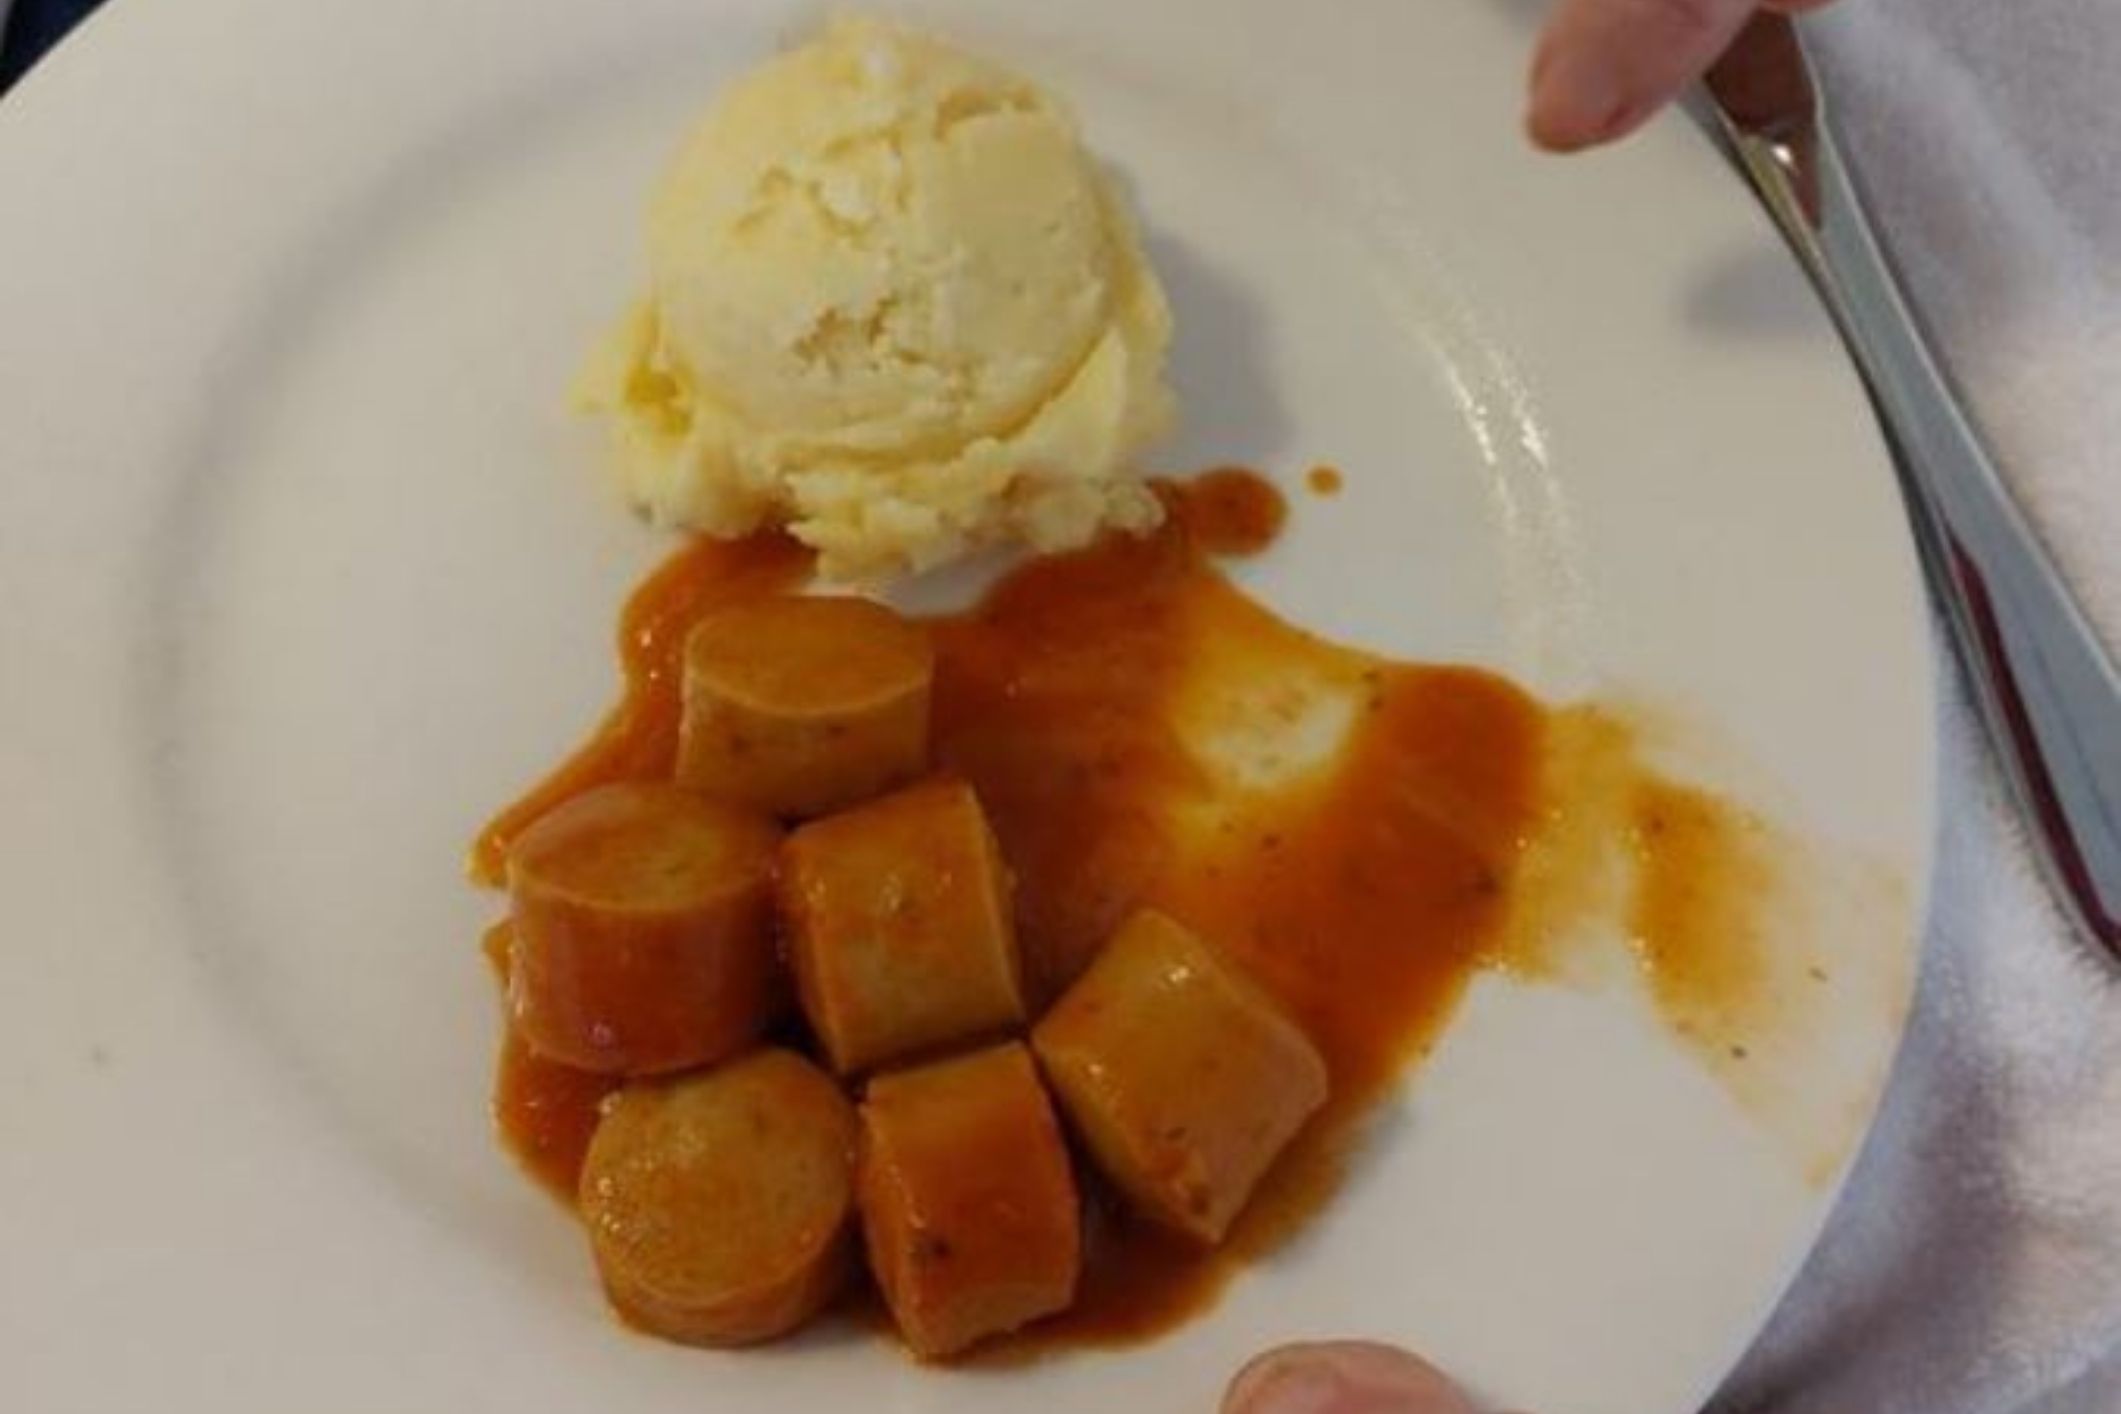 “Disgusting” aged care meal sparks social media outrage